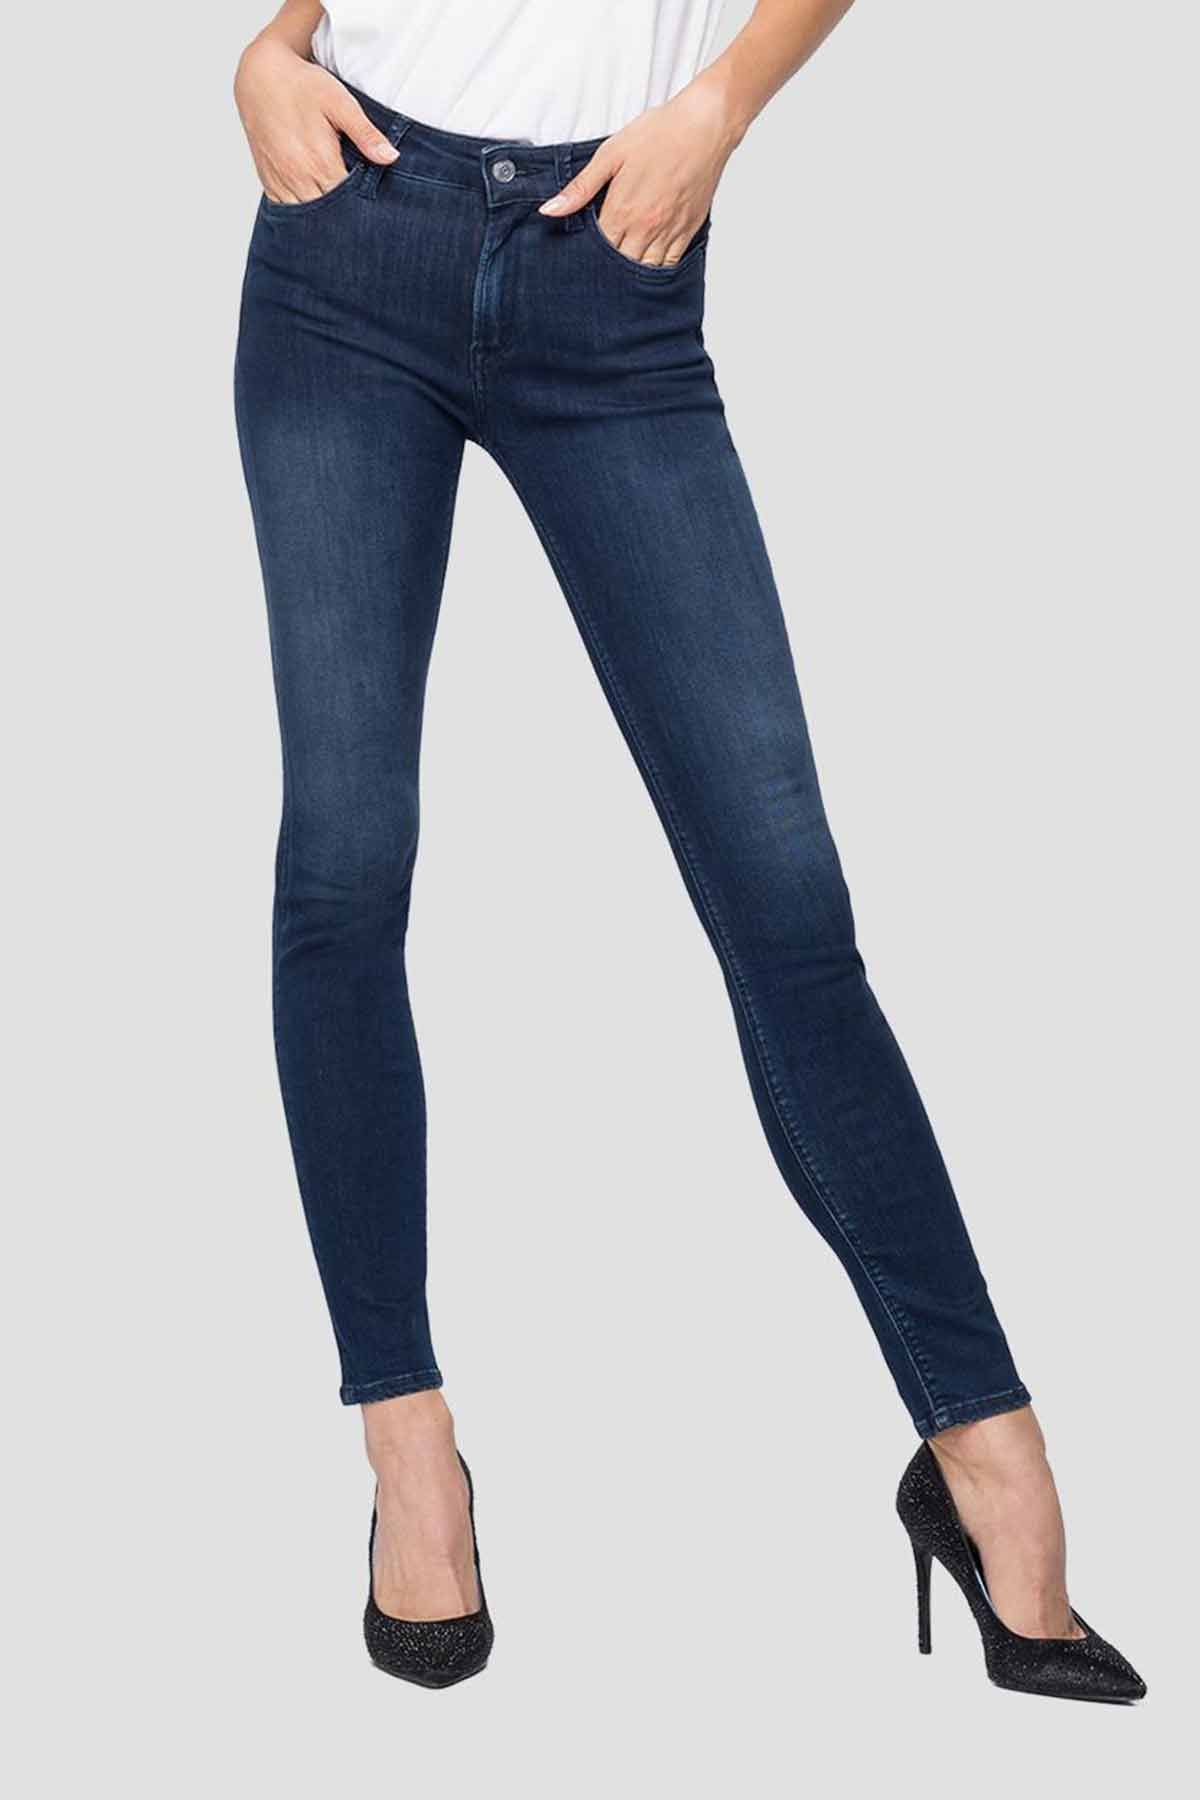 Replay Skinny Fit Luzien Jeans-Libas Trendy Fashion Store